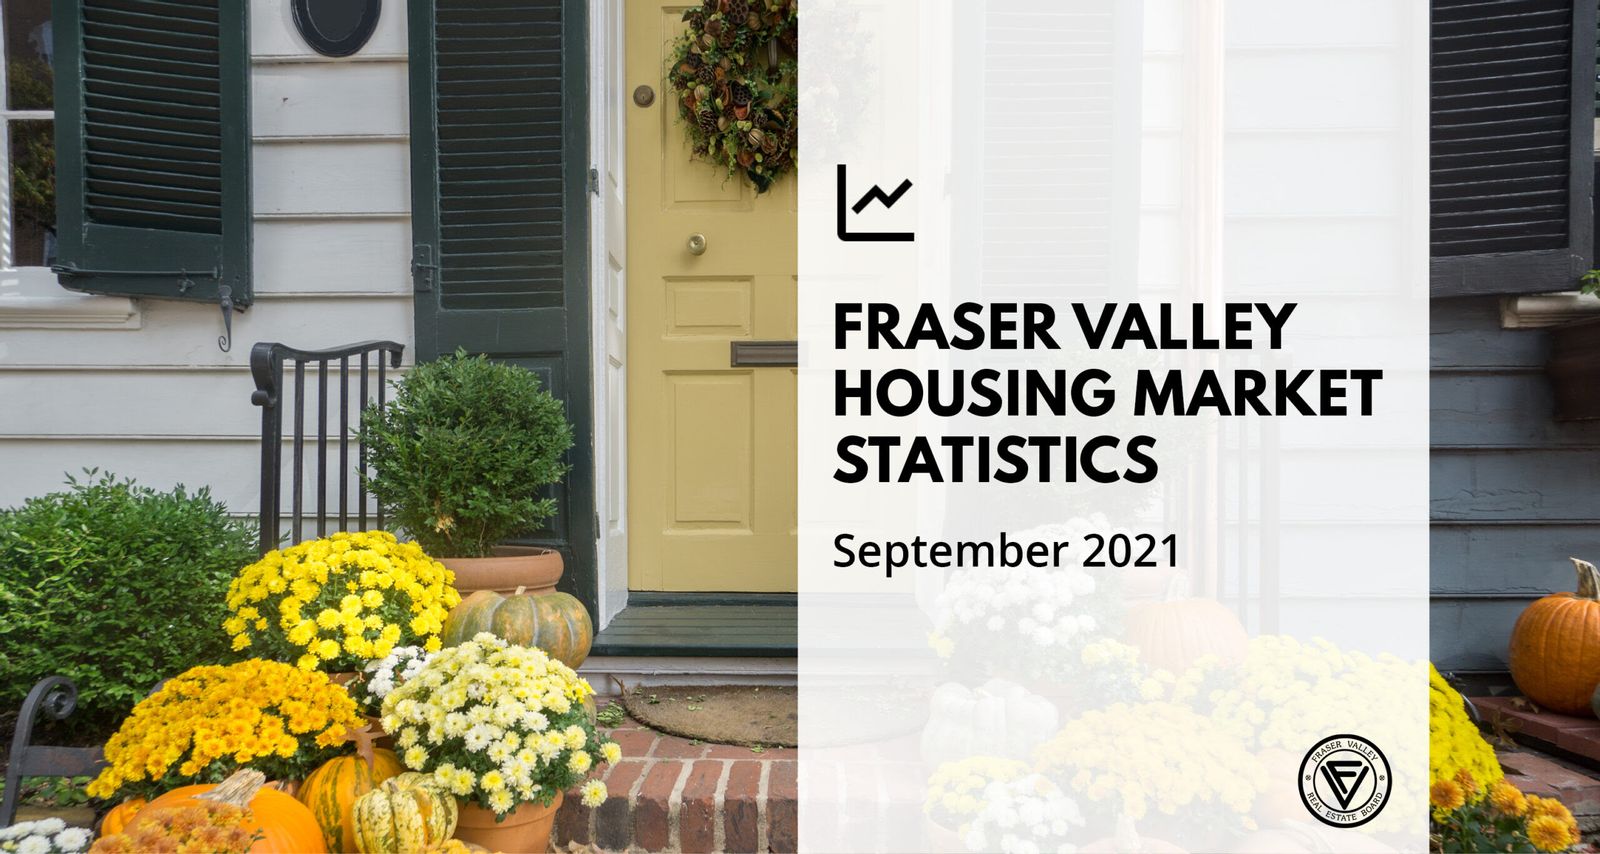 Positive start to fall market; new listings increase, sales soften